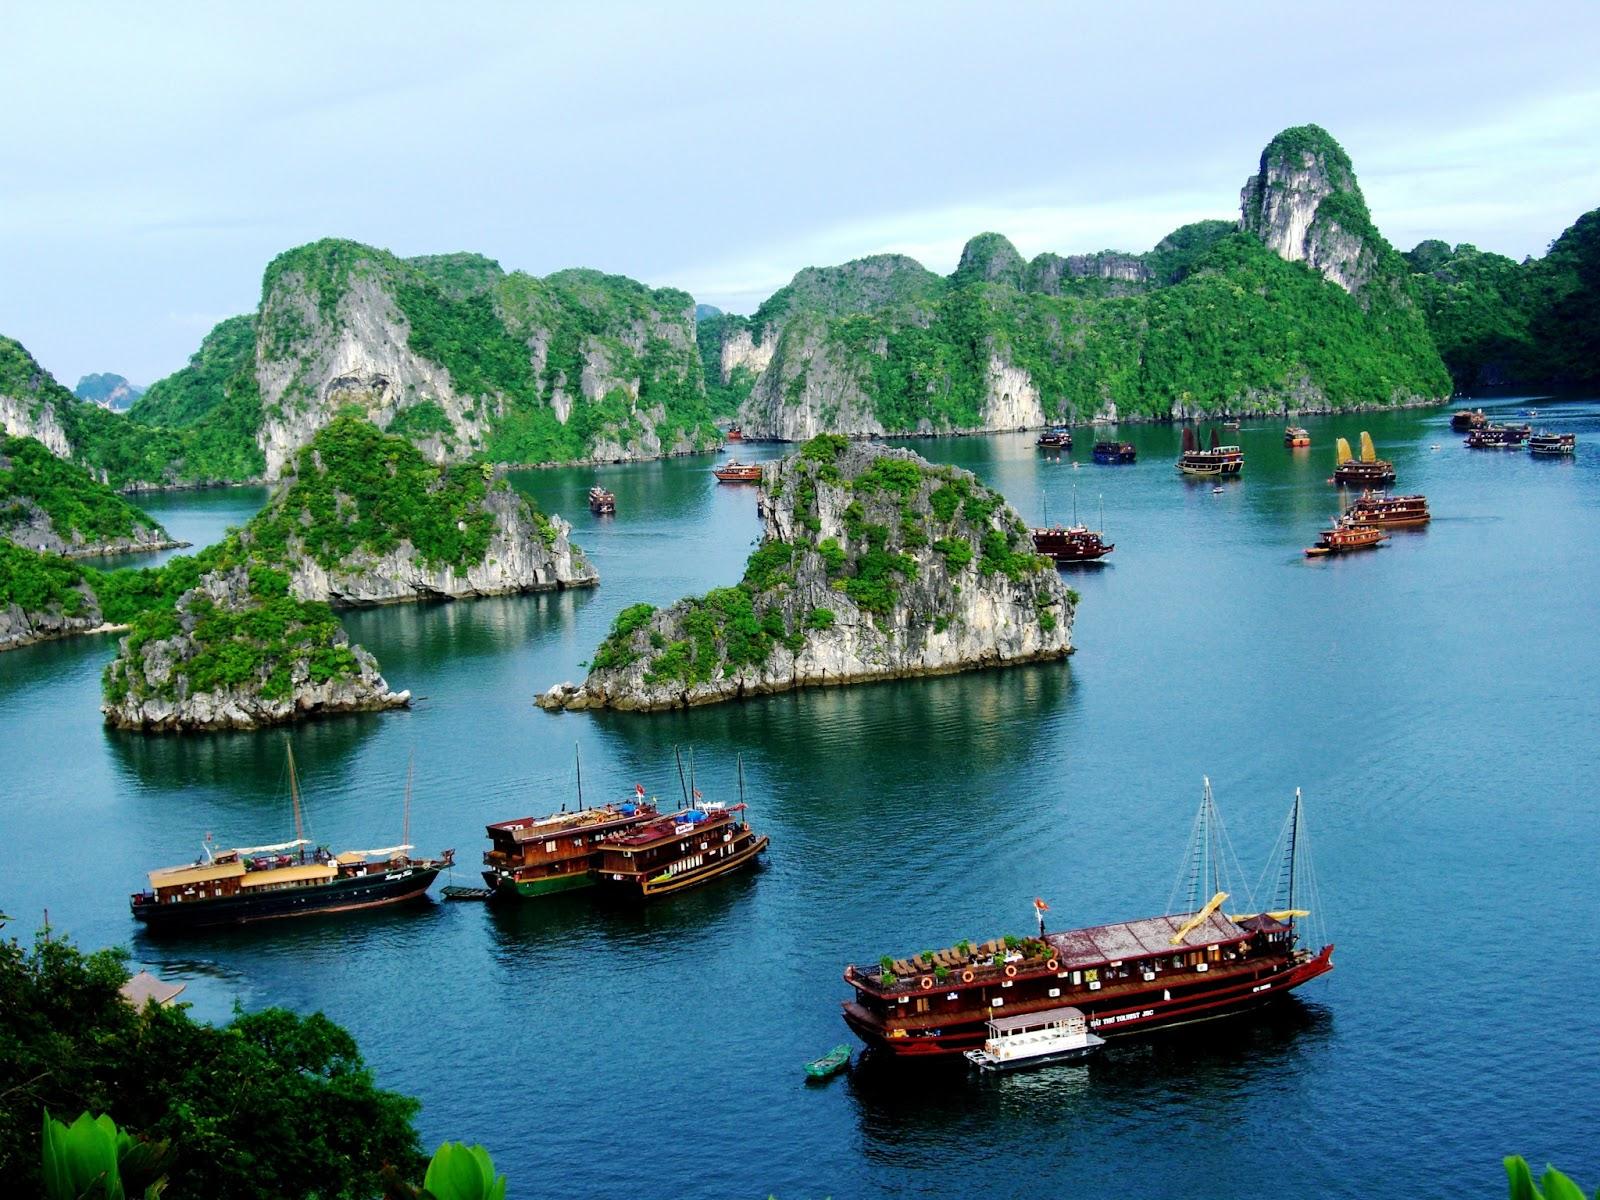 Halong Bay is the most famous destination in Vietnam because of its charming beauty